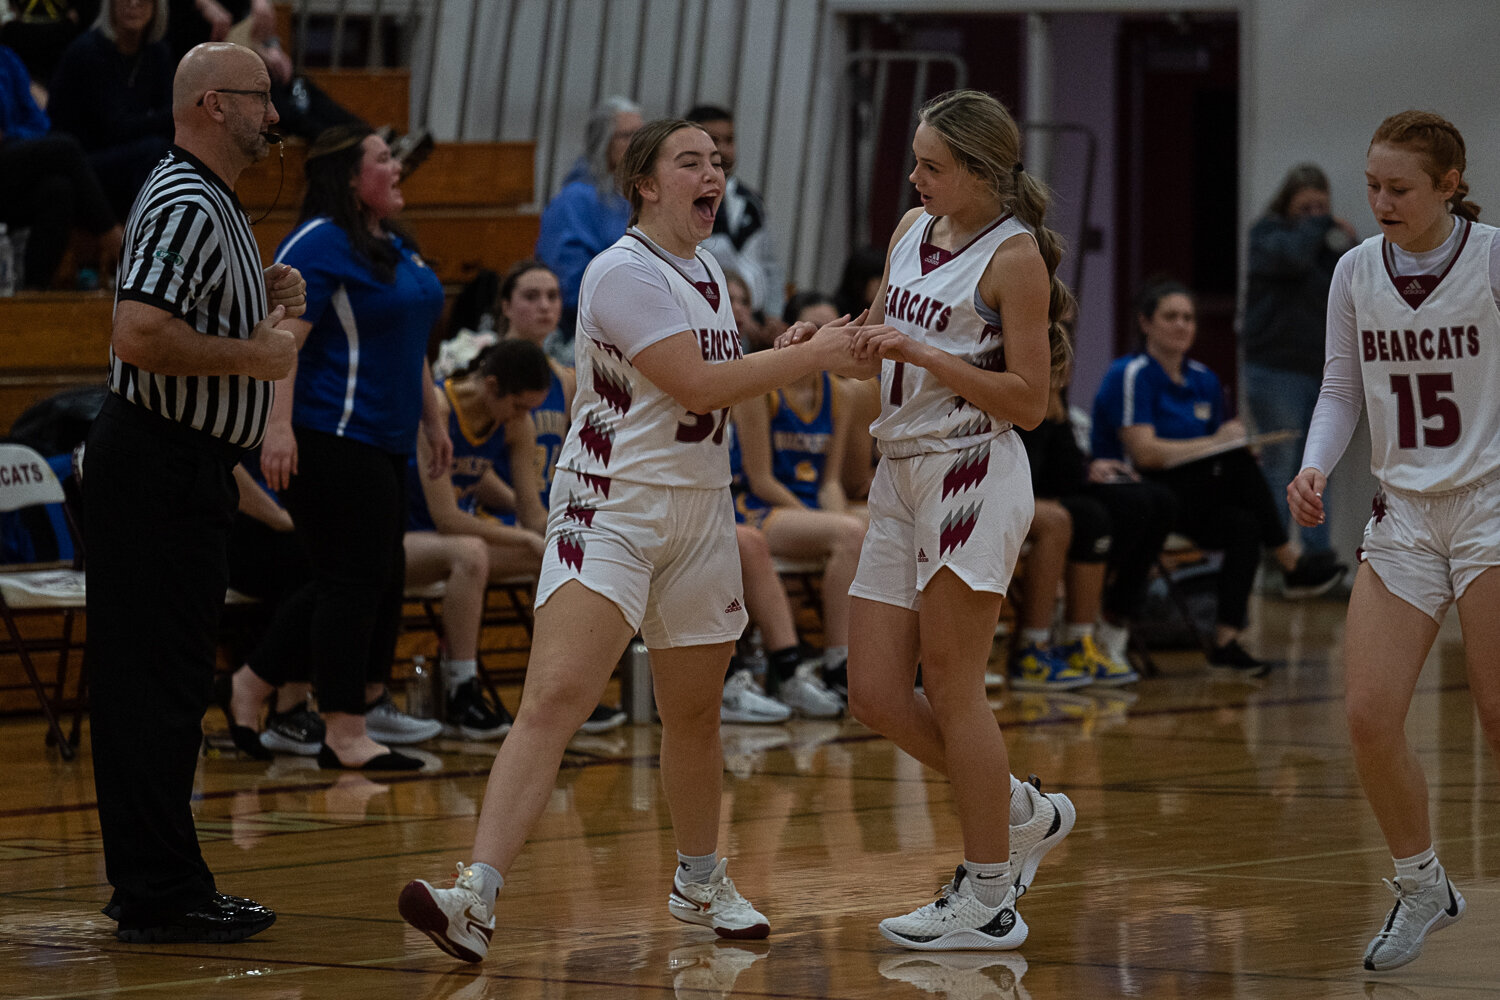 MaKenzie Dotson (left) celebrates with Joy Cushman after Cushman's buzzer-beater at the end of the second quarter during W.F. West's win over Rochester on Dec. 6.